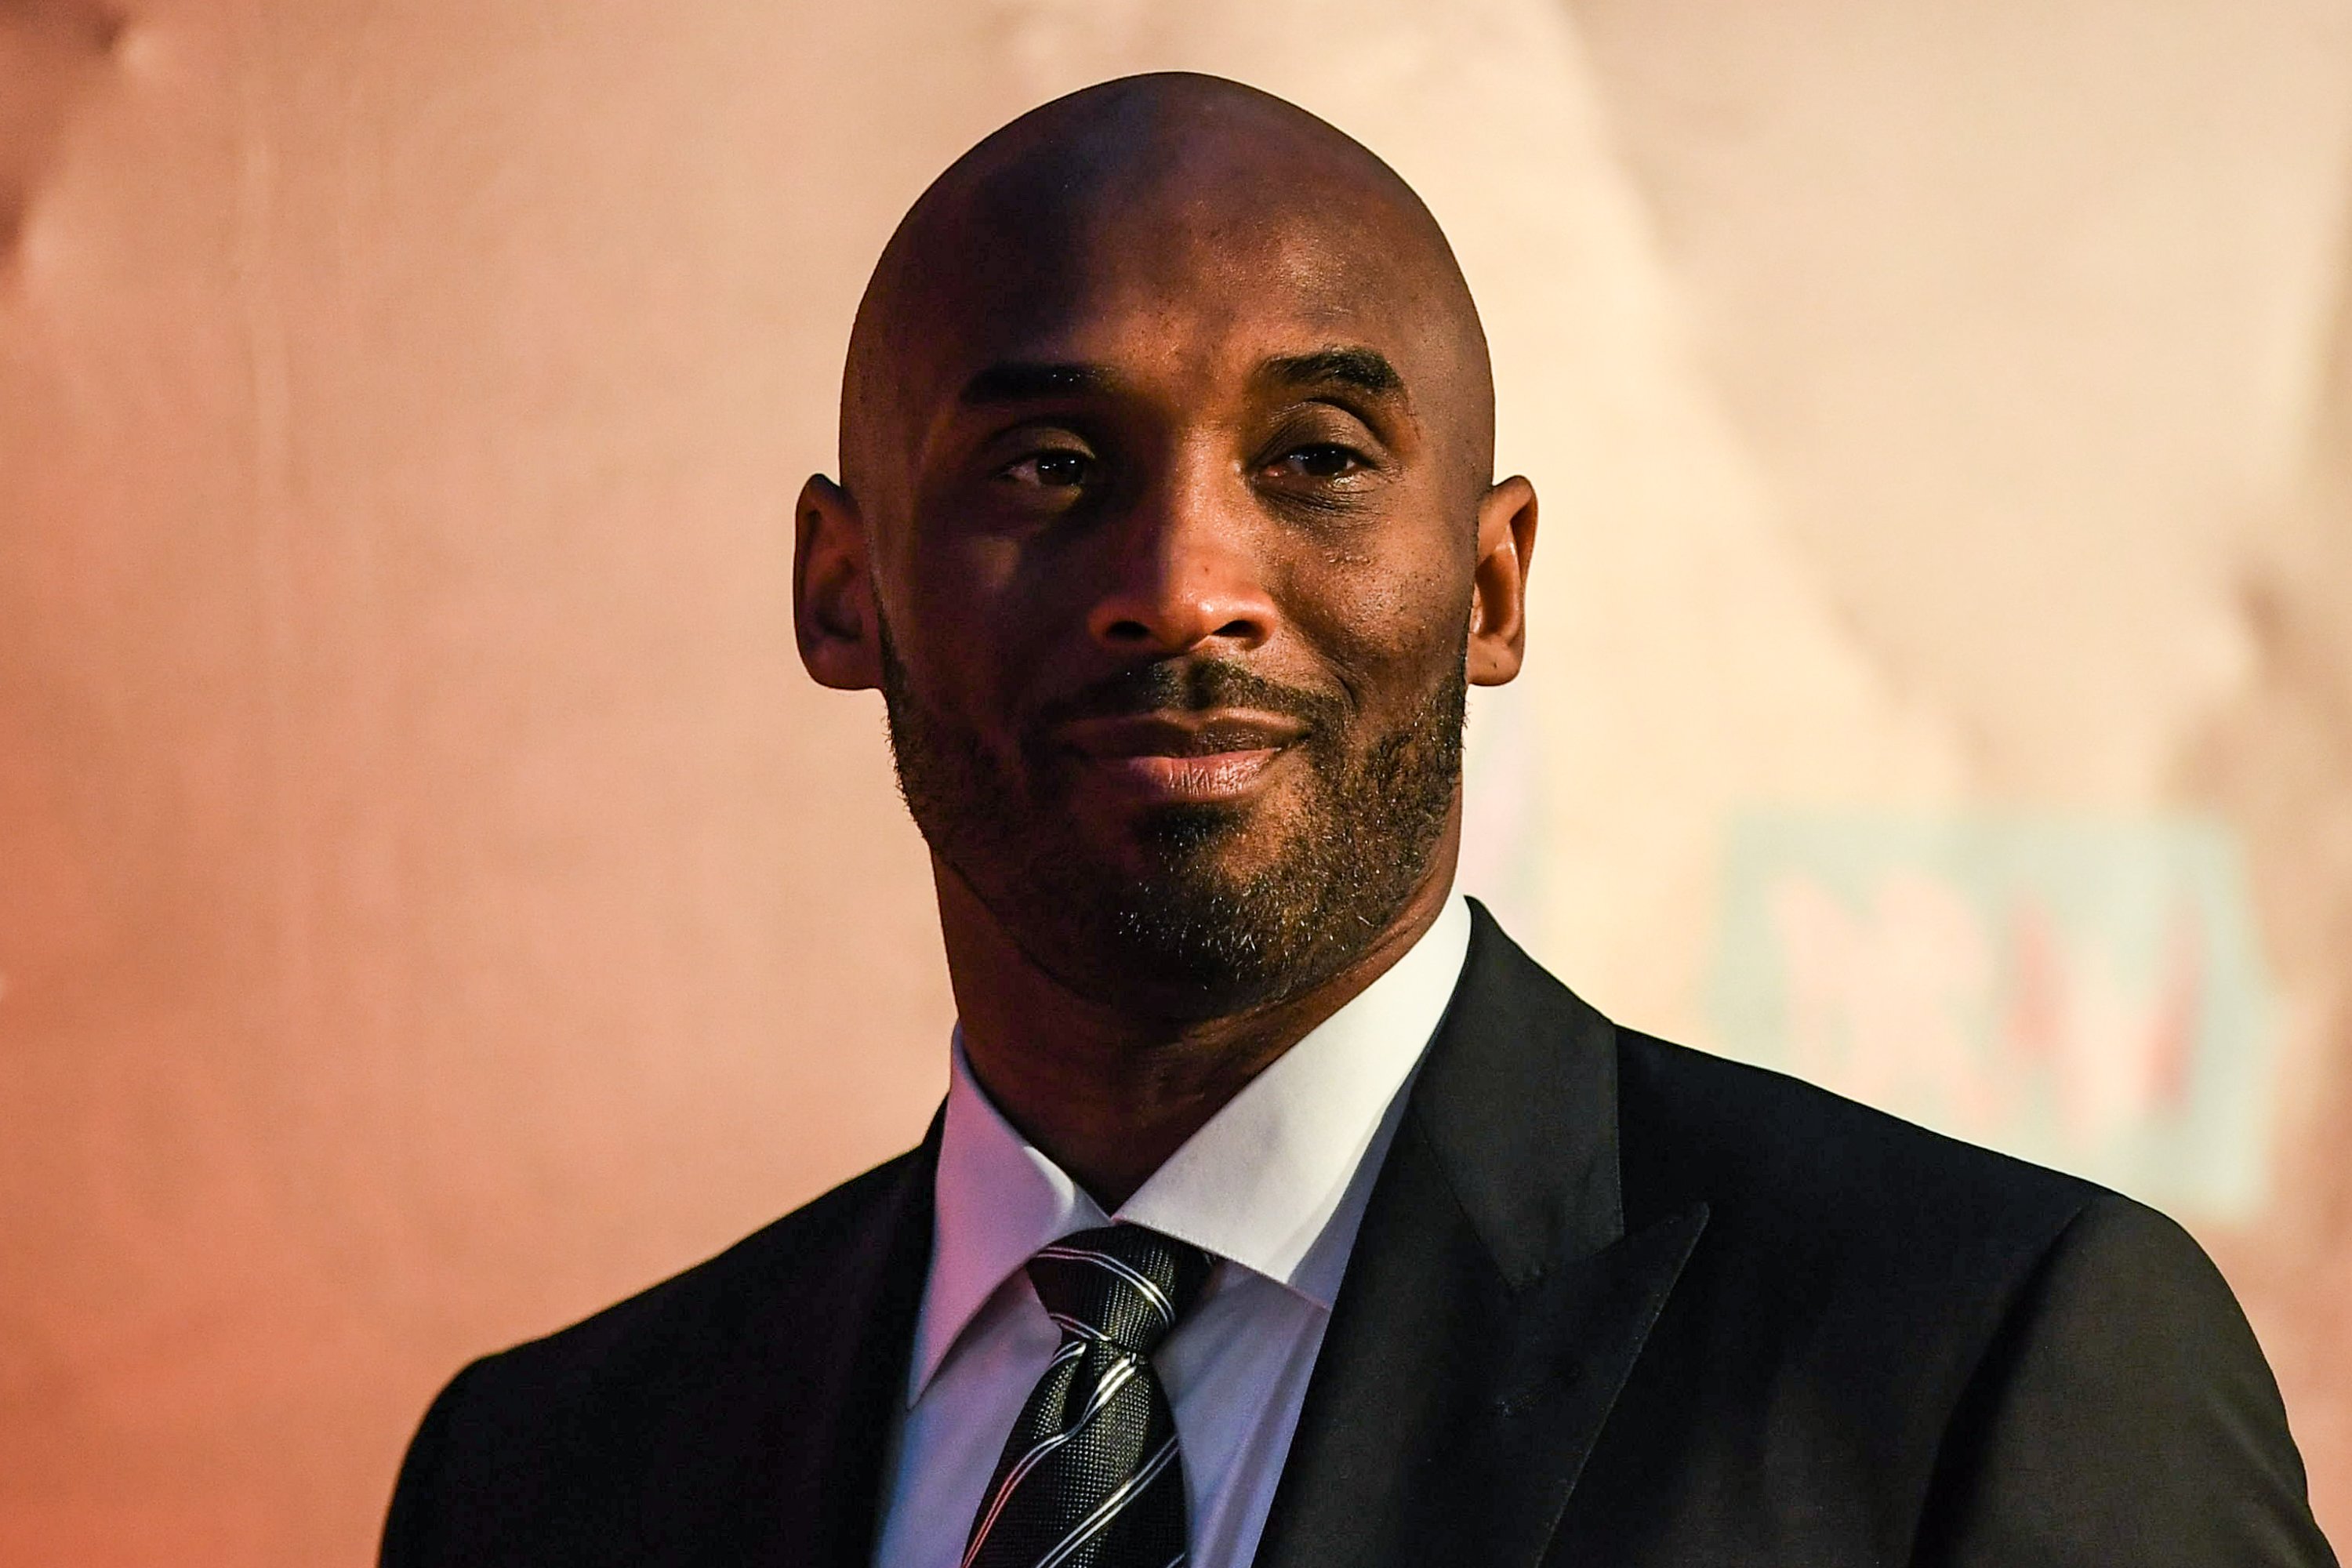 Kobe Bryant during the FIBA Basketball World Cup 2019 Draw Ceremony on March 16, 2019, in Shenzhen, China. | Source: Getty Images.